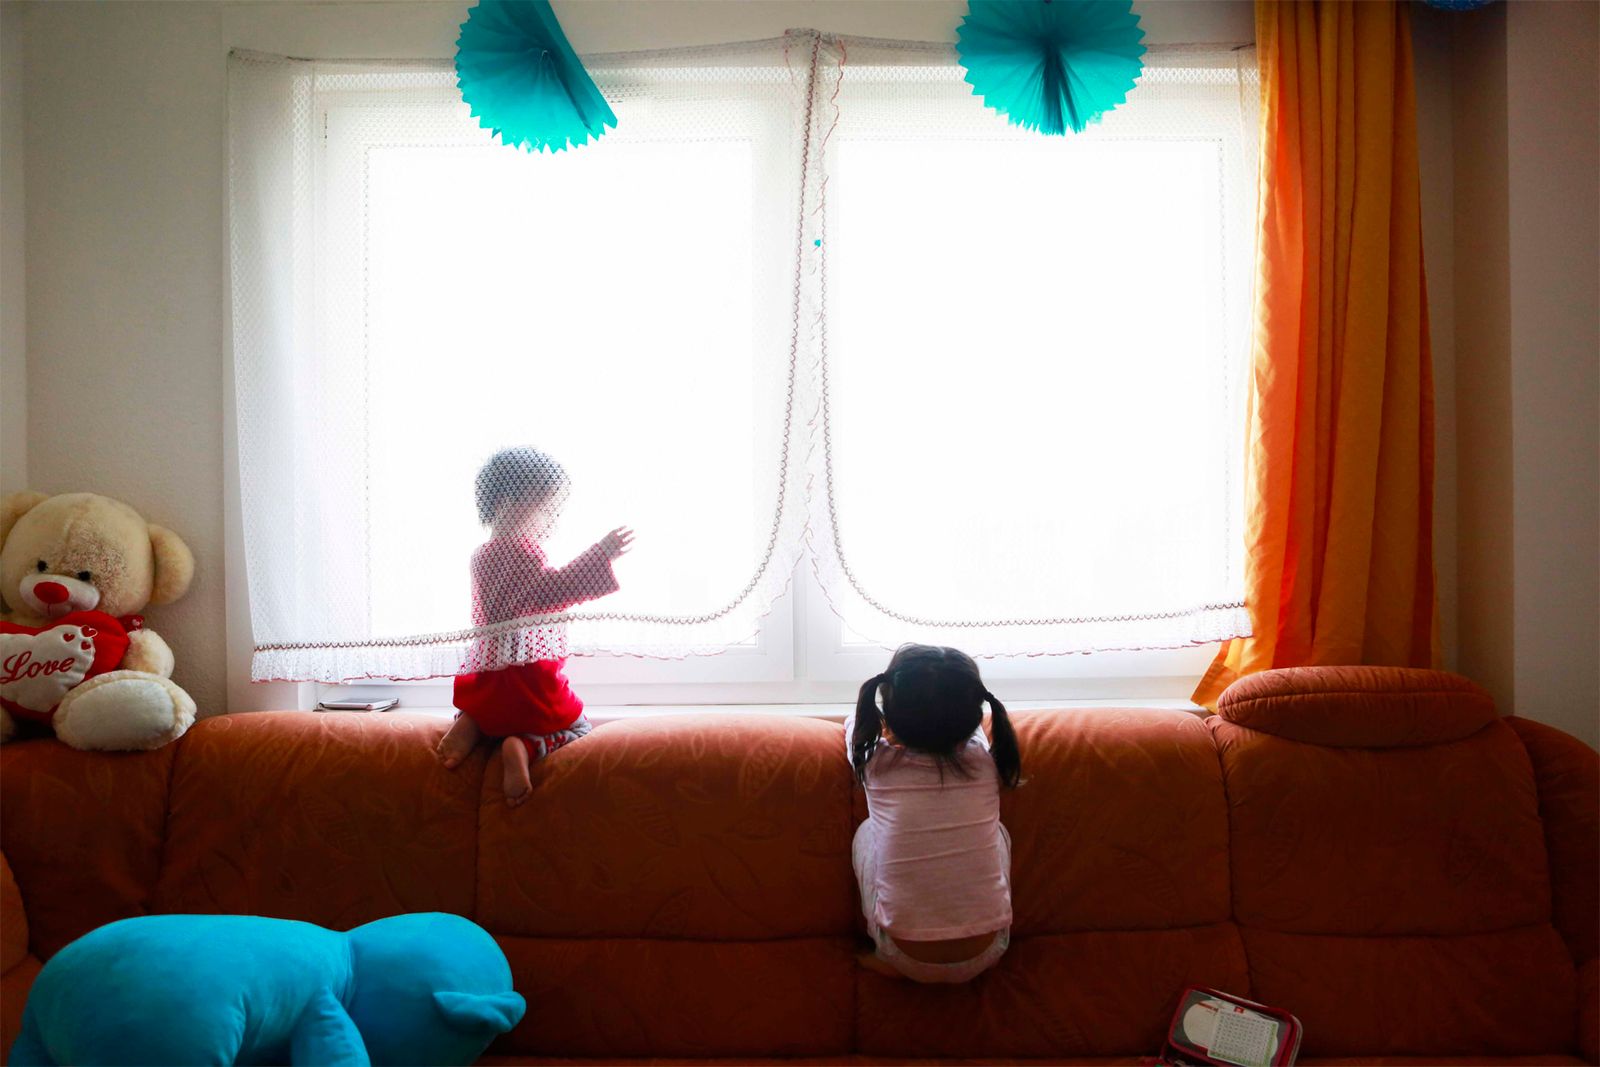 © Alexa Vachon - Two children play in their home, surrounded by family.